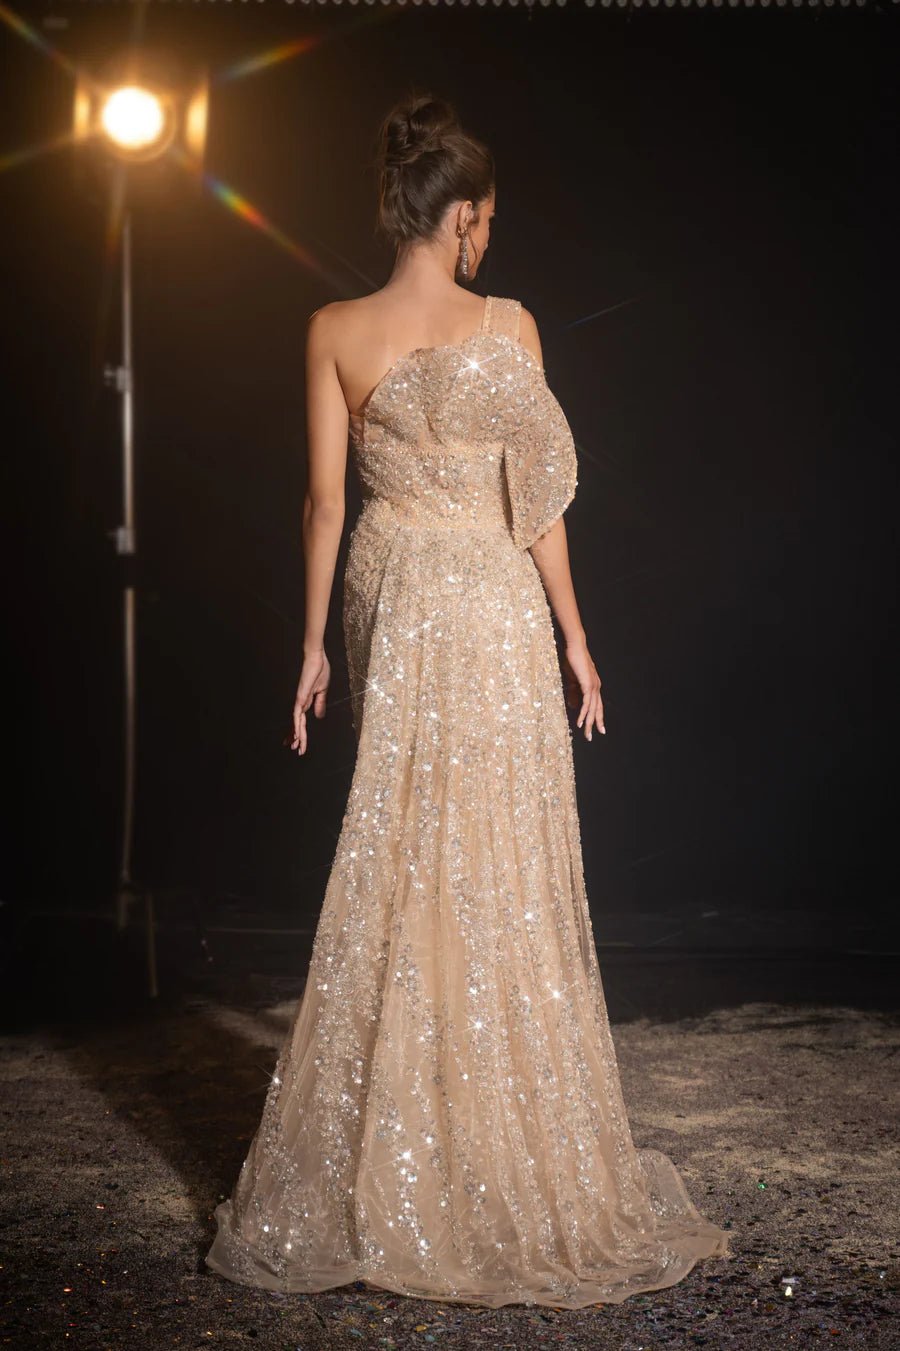 Elegant Champagne Gold Sequin Evening Gown - Glitter One-Shoulder Dress - Pretty Sequin Dress for Special Occasions Plus Size - WonderlandByLilian